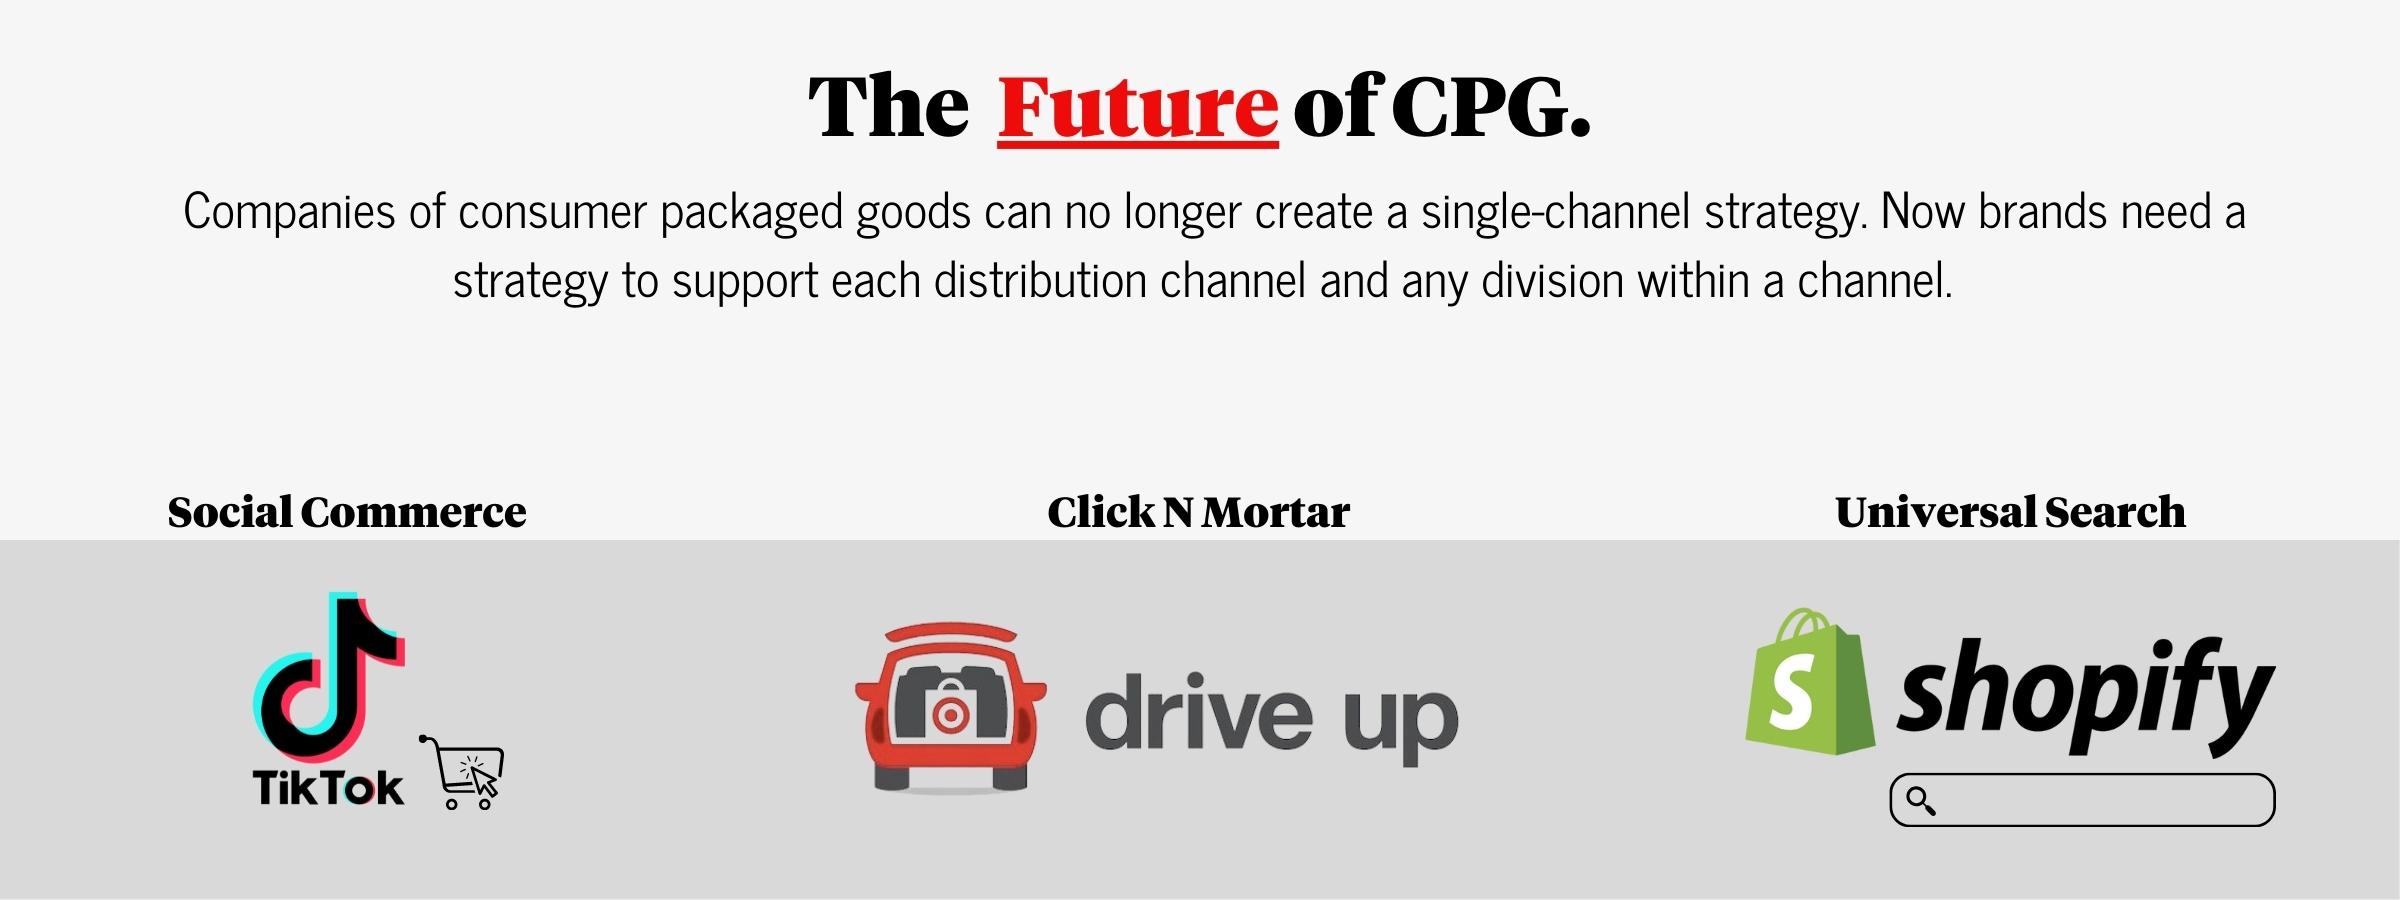 Changes in CPG